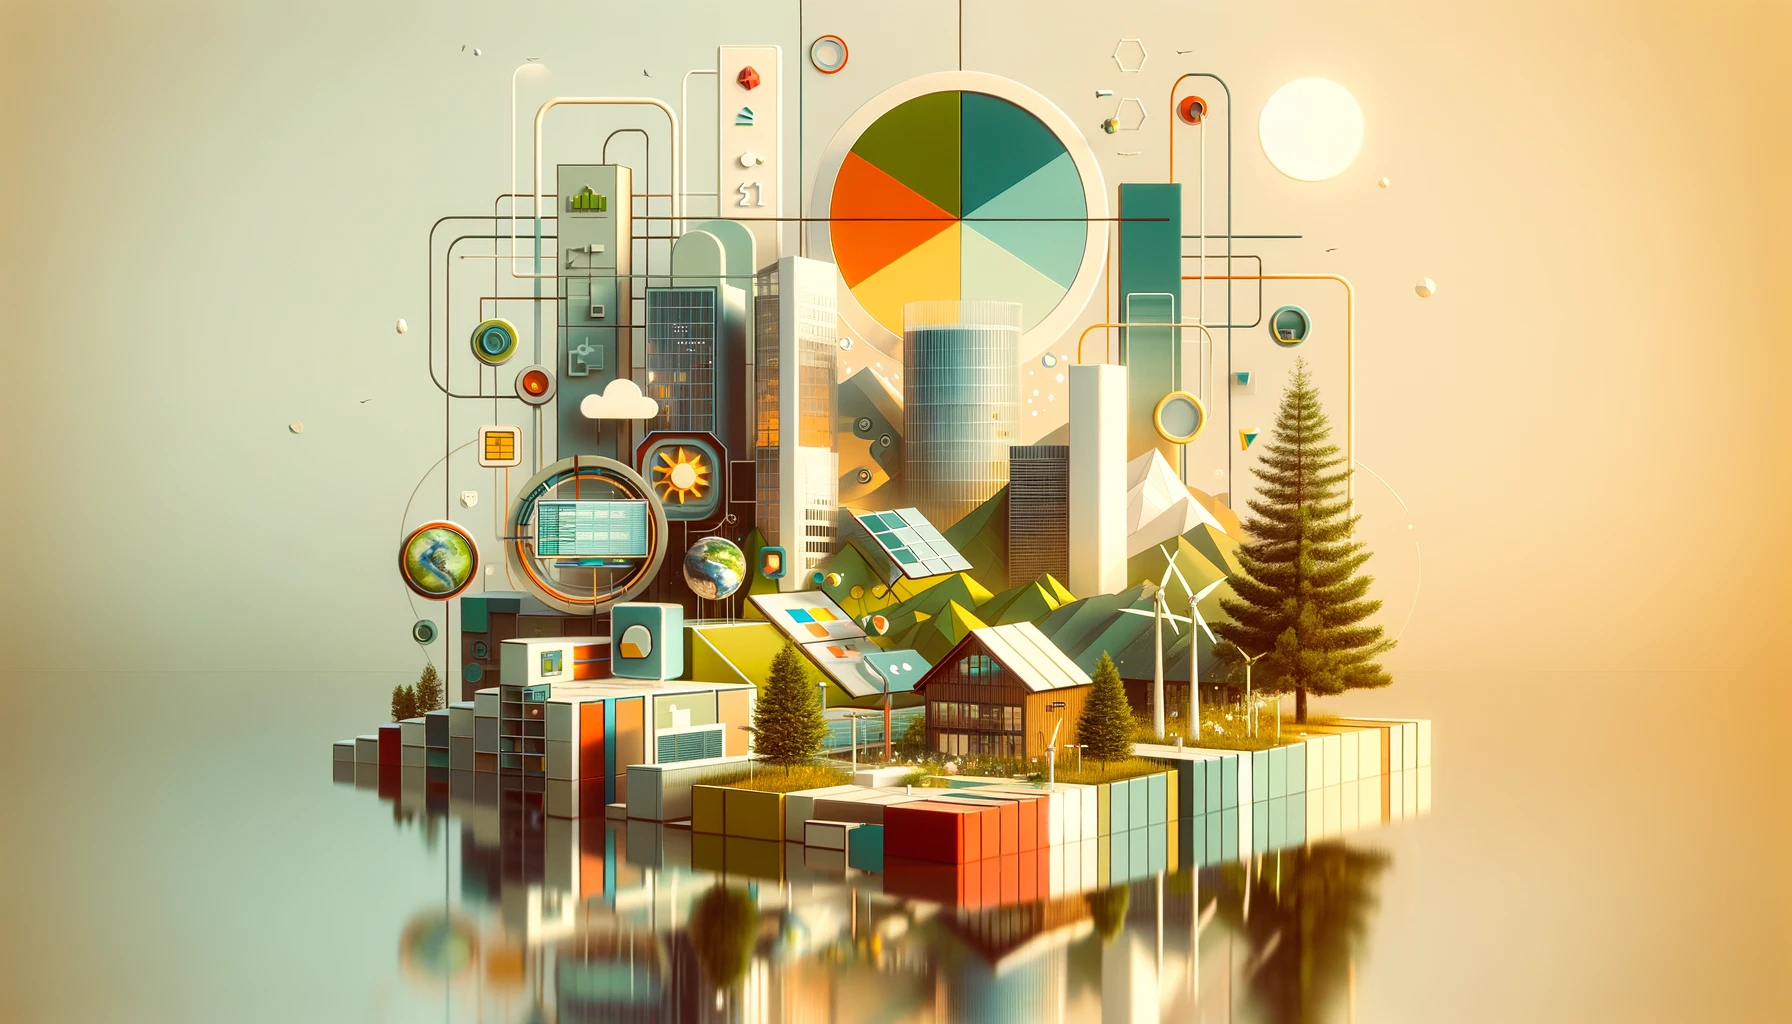 Stylized illustration of an abstract cityscape with colorful geometric shapes, graphs, and icons signifying technology and sustainability, reflecting in water.